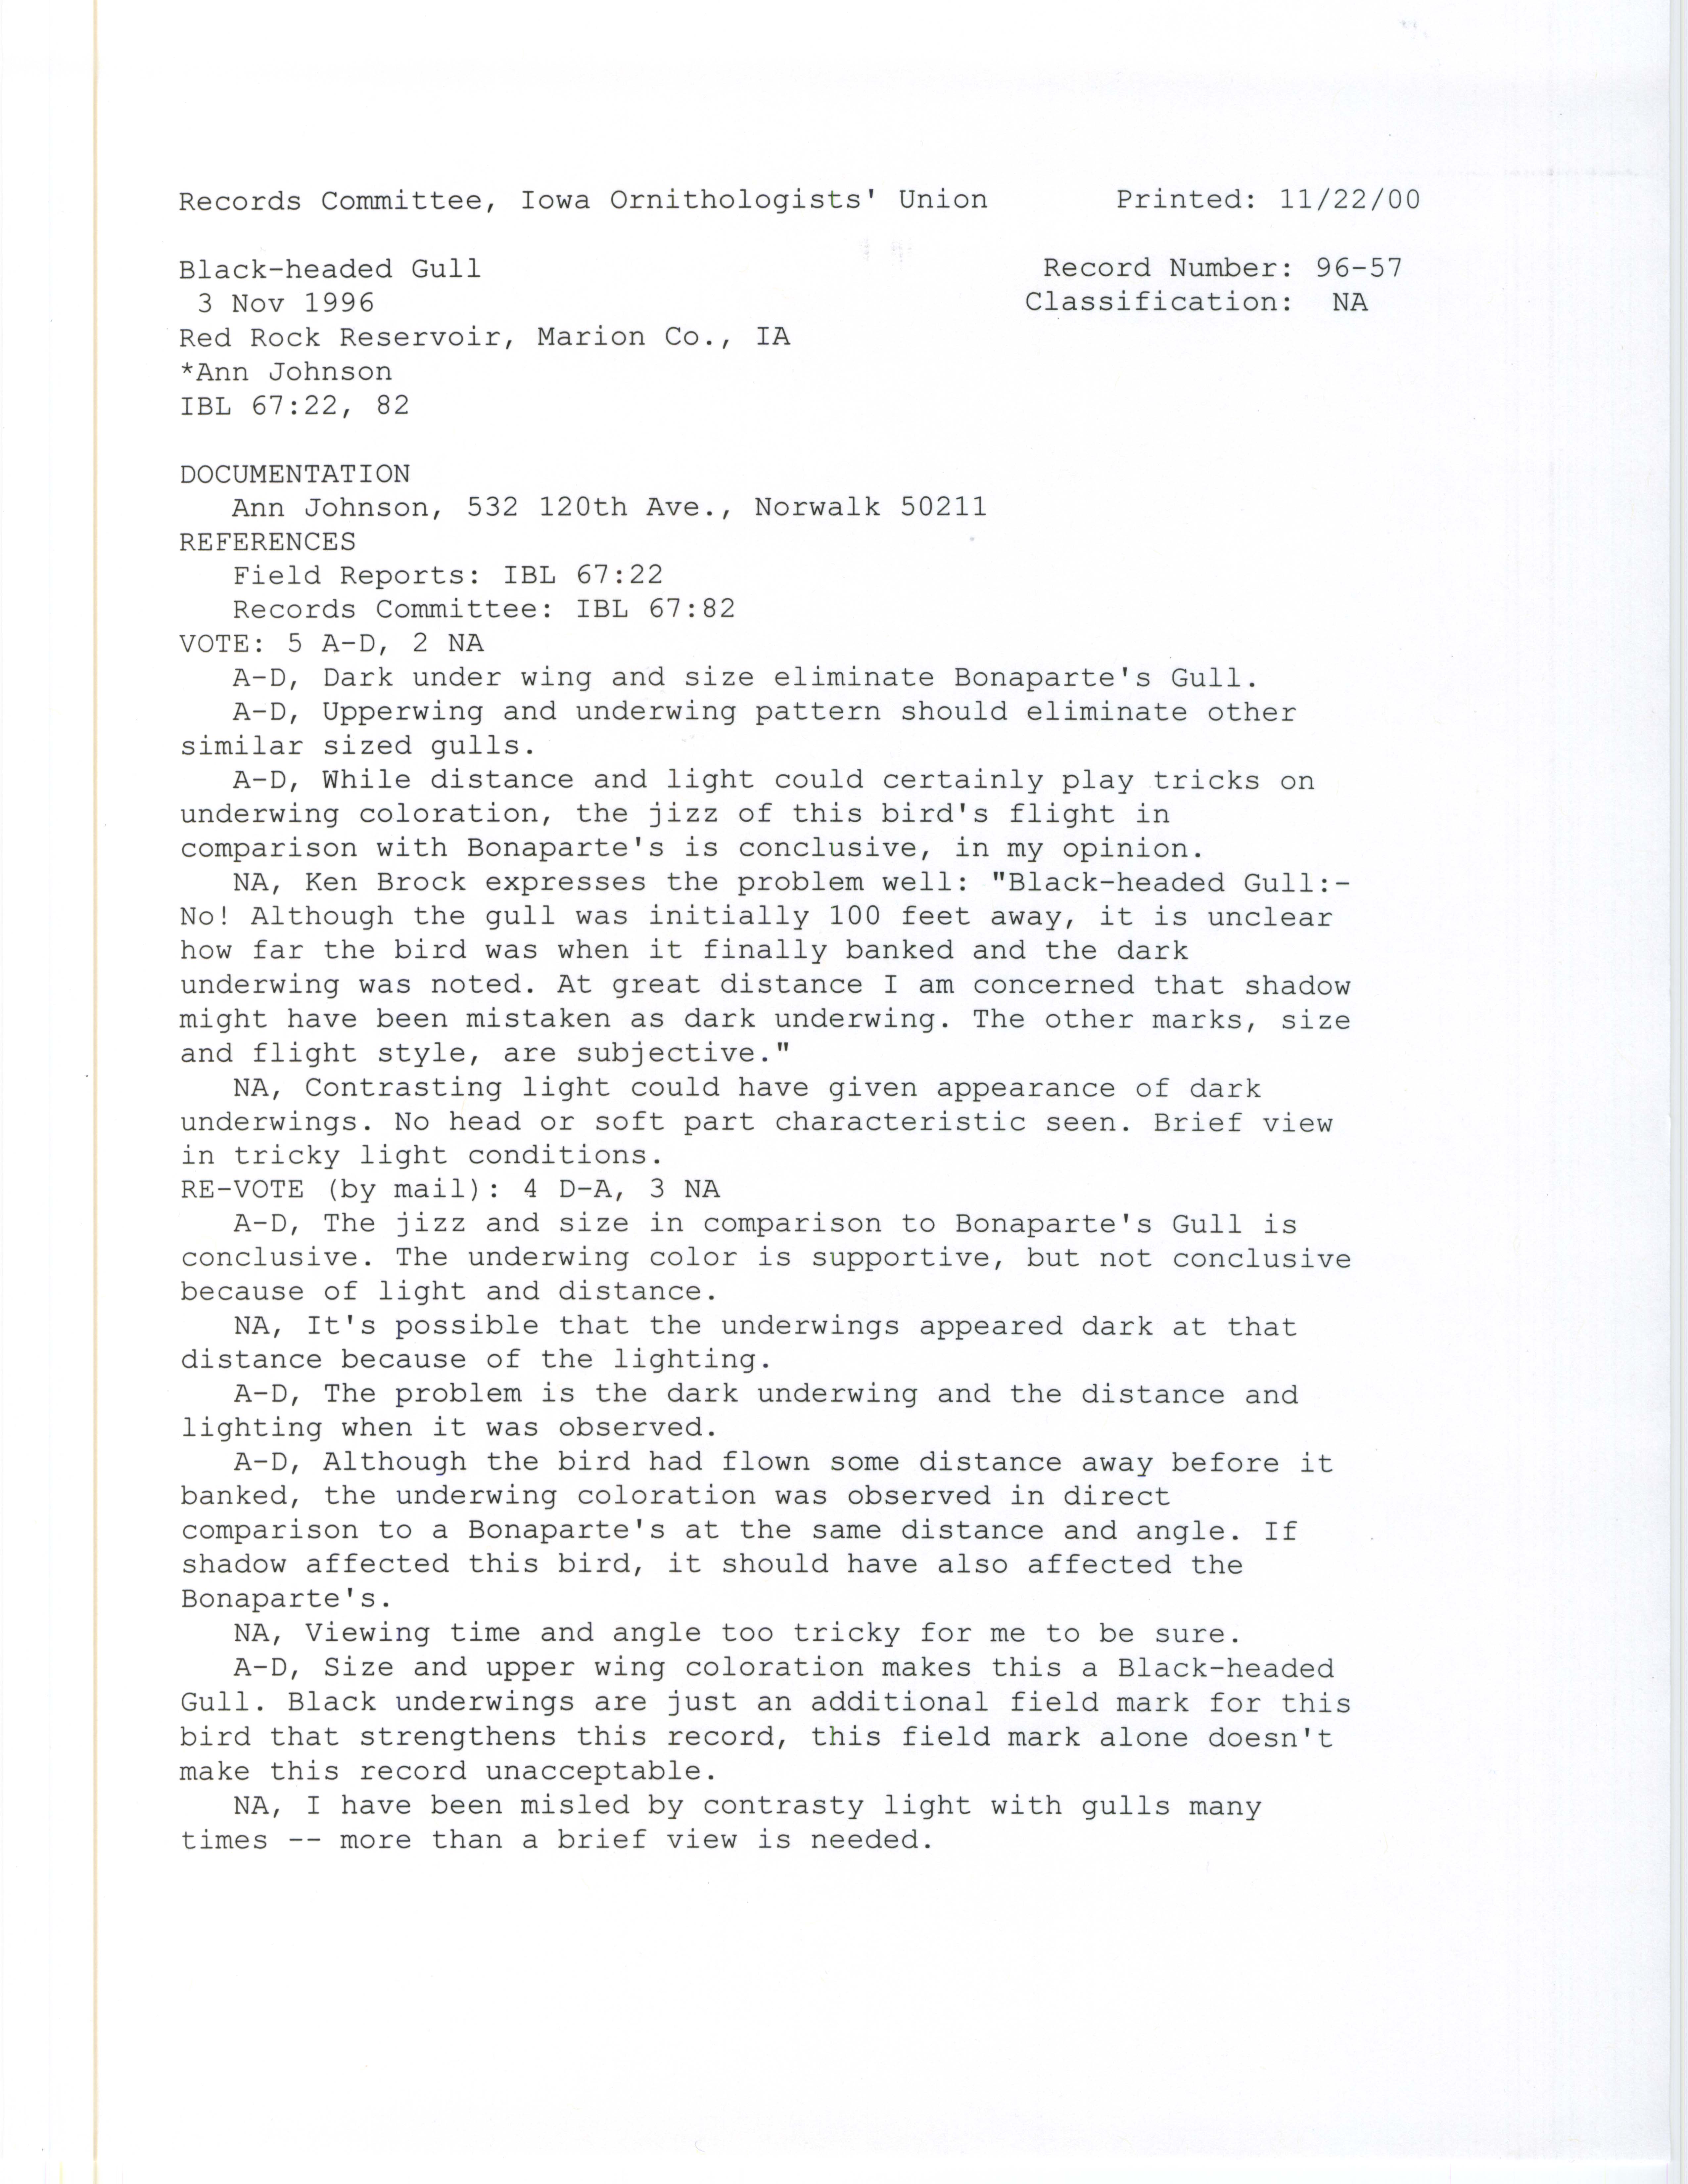 Records Committee review for rare bird sighting of Black-headed Gull at Red Rock Reservoir, 1996